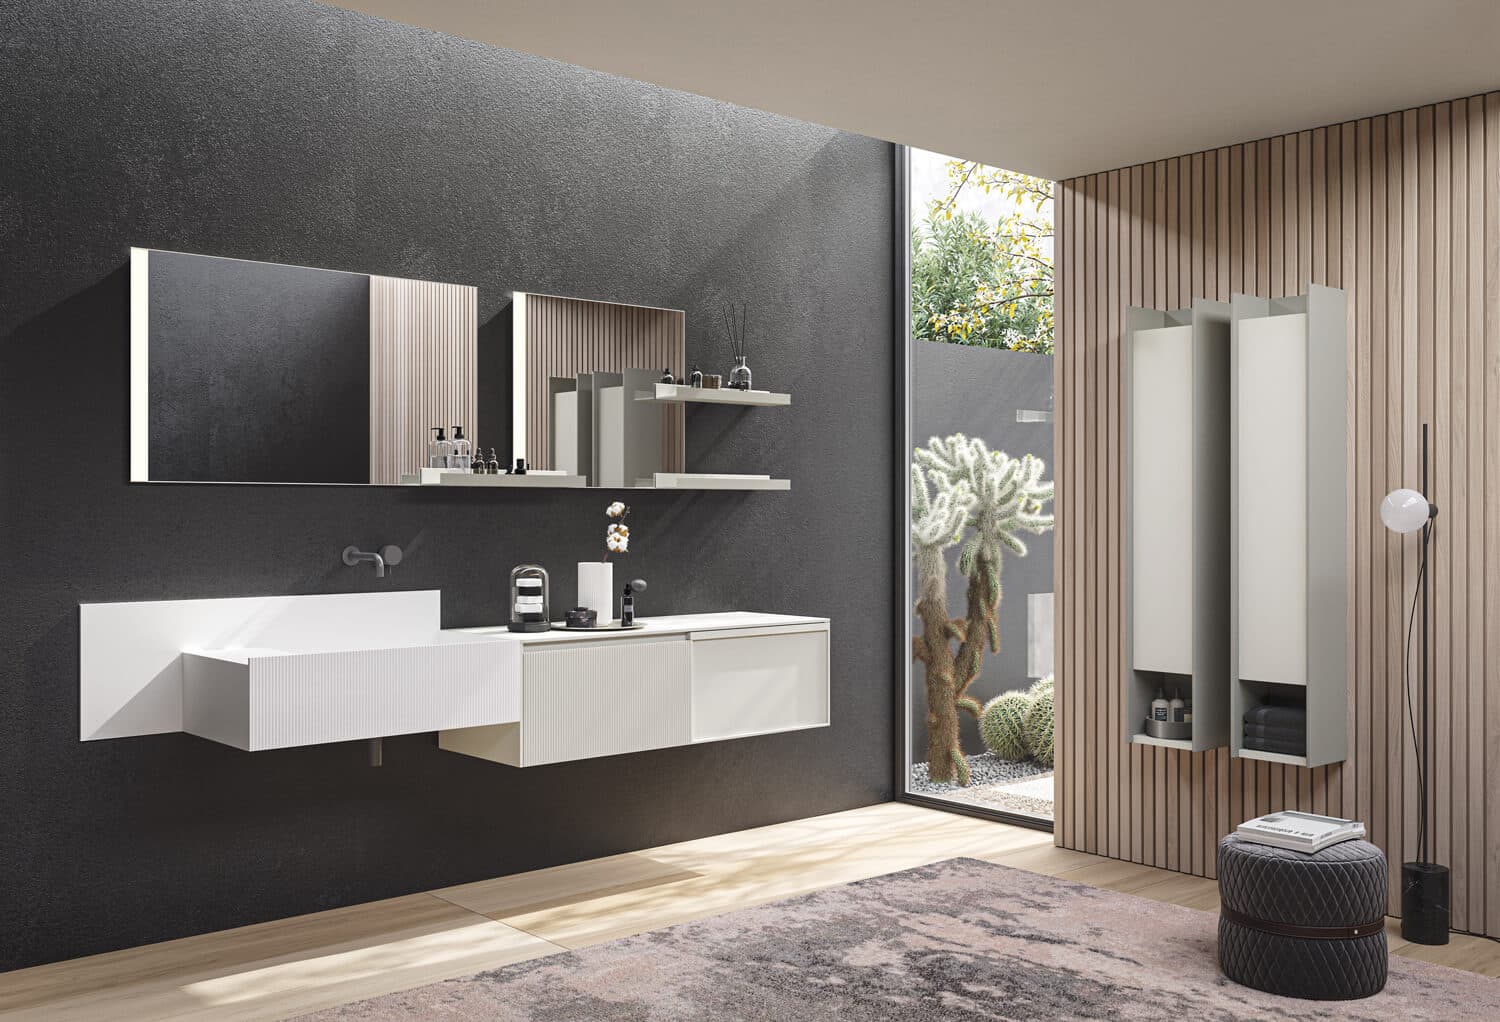 Peltro and Platino matte lacquers on framed and flat, smooth and plissé vanities. Plissé style also used for the front of the Square washbasin. The single shelves can be positioned where desired to tie the design together. 